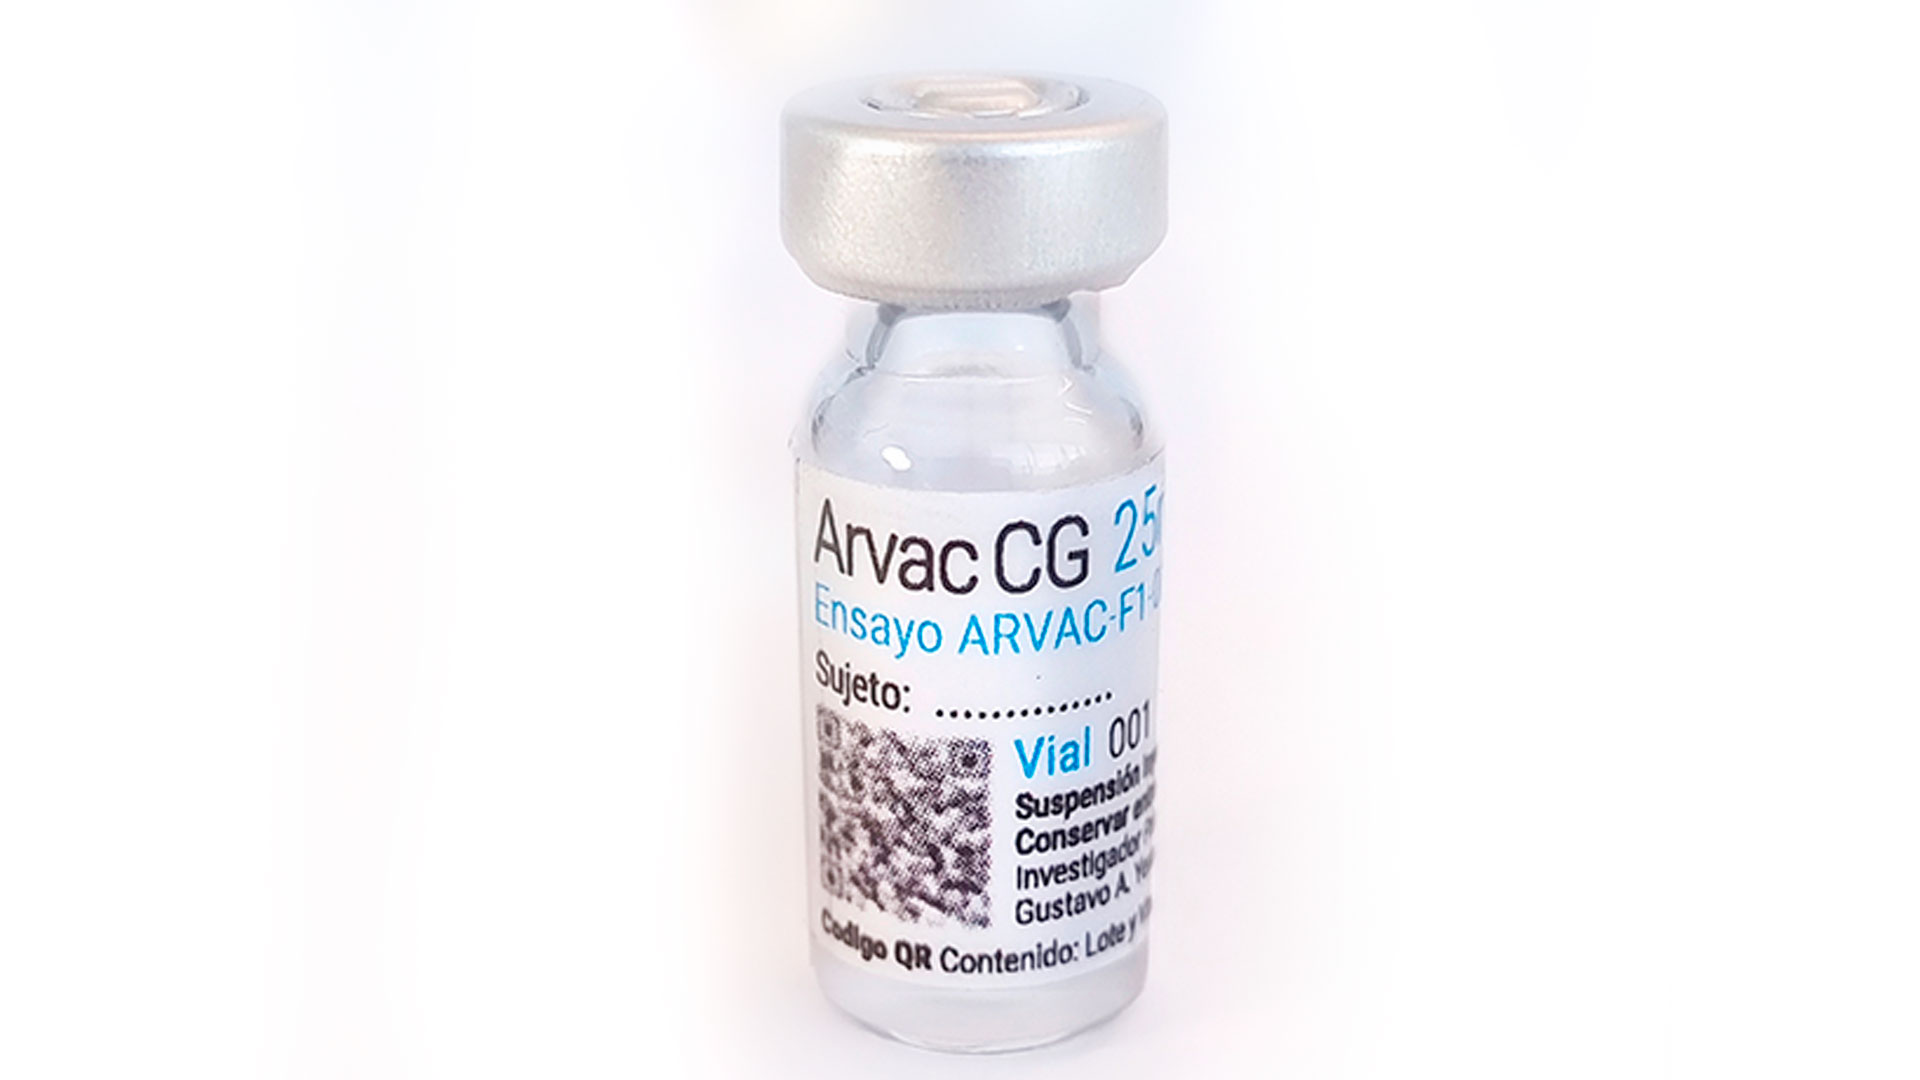 The Argentine vaccine against COVID, "ARVAC Cecilia Grierson" It is developed by CONICET, the National University of San Martín (UNSAM) and the Pablo Cassará Laboratory